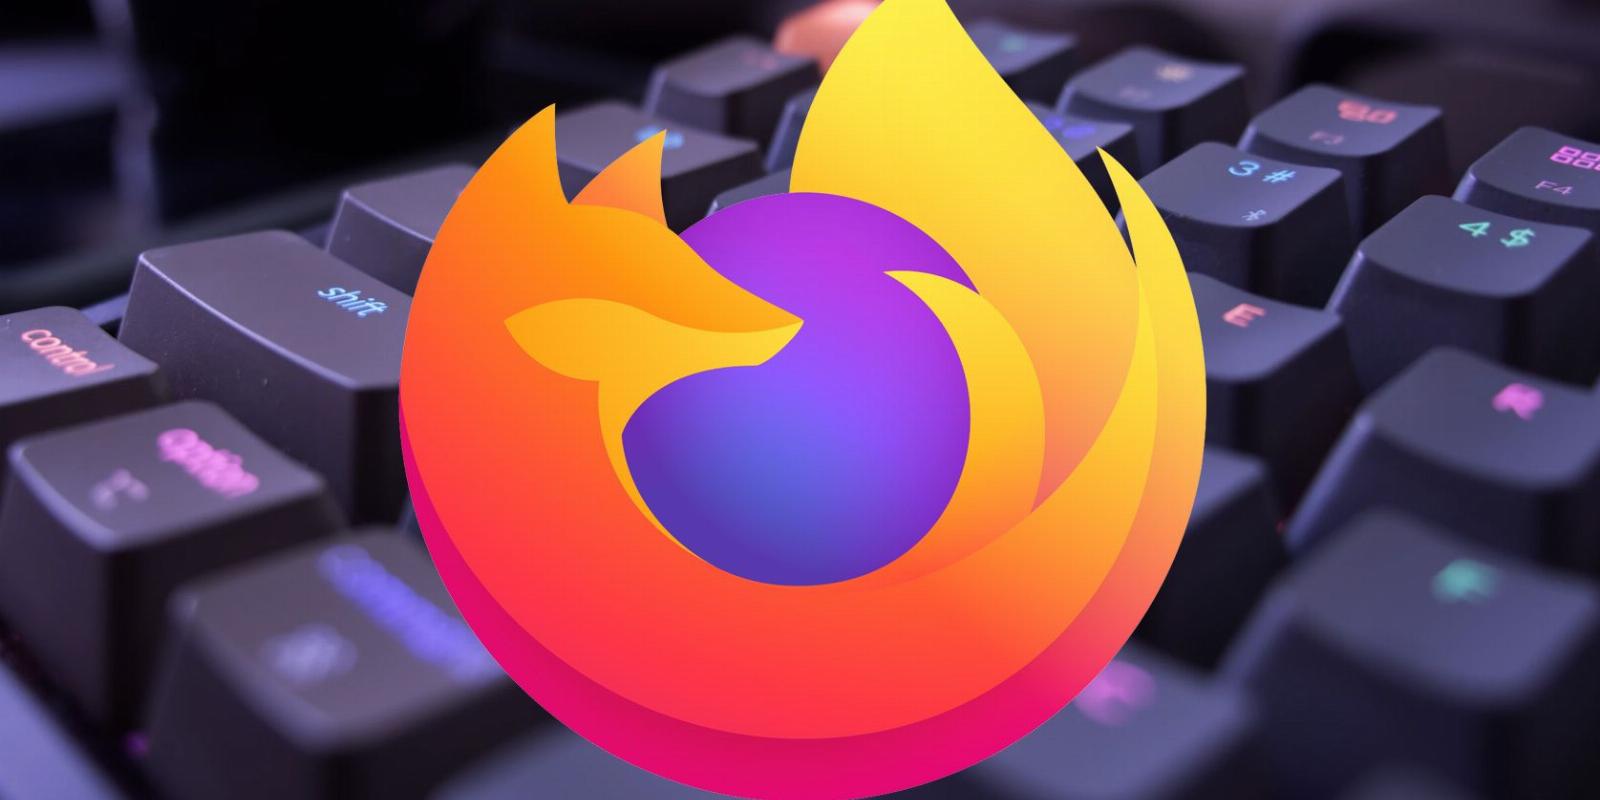 Firefox Version 110.0 Is Available: Everything You Need to Know